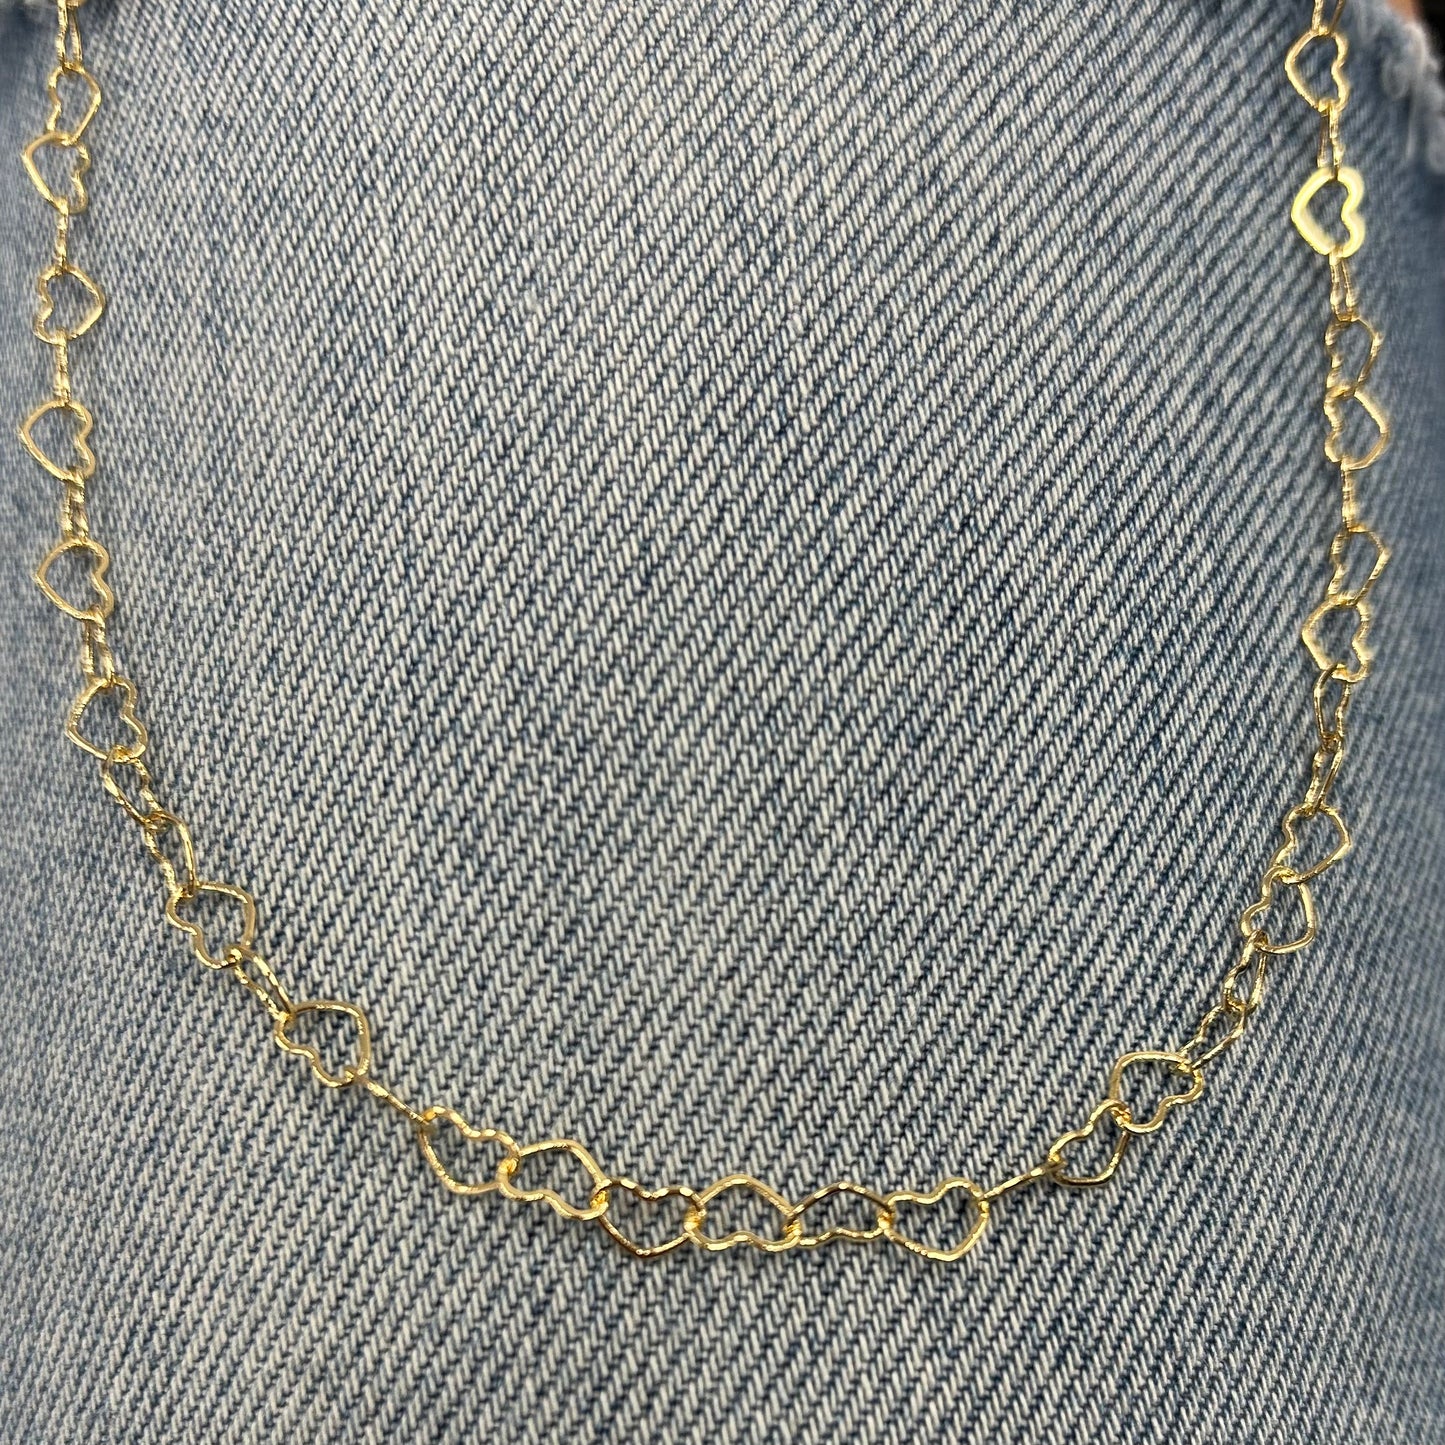 Micro Heart Chain Link Necklace - Gold